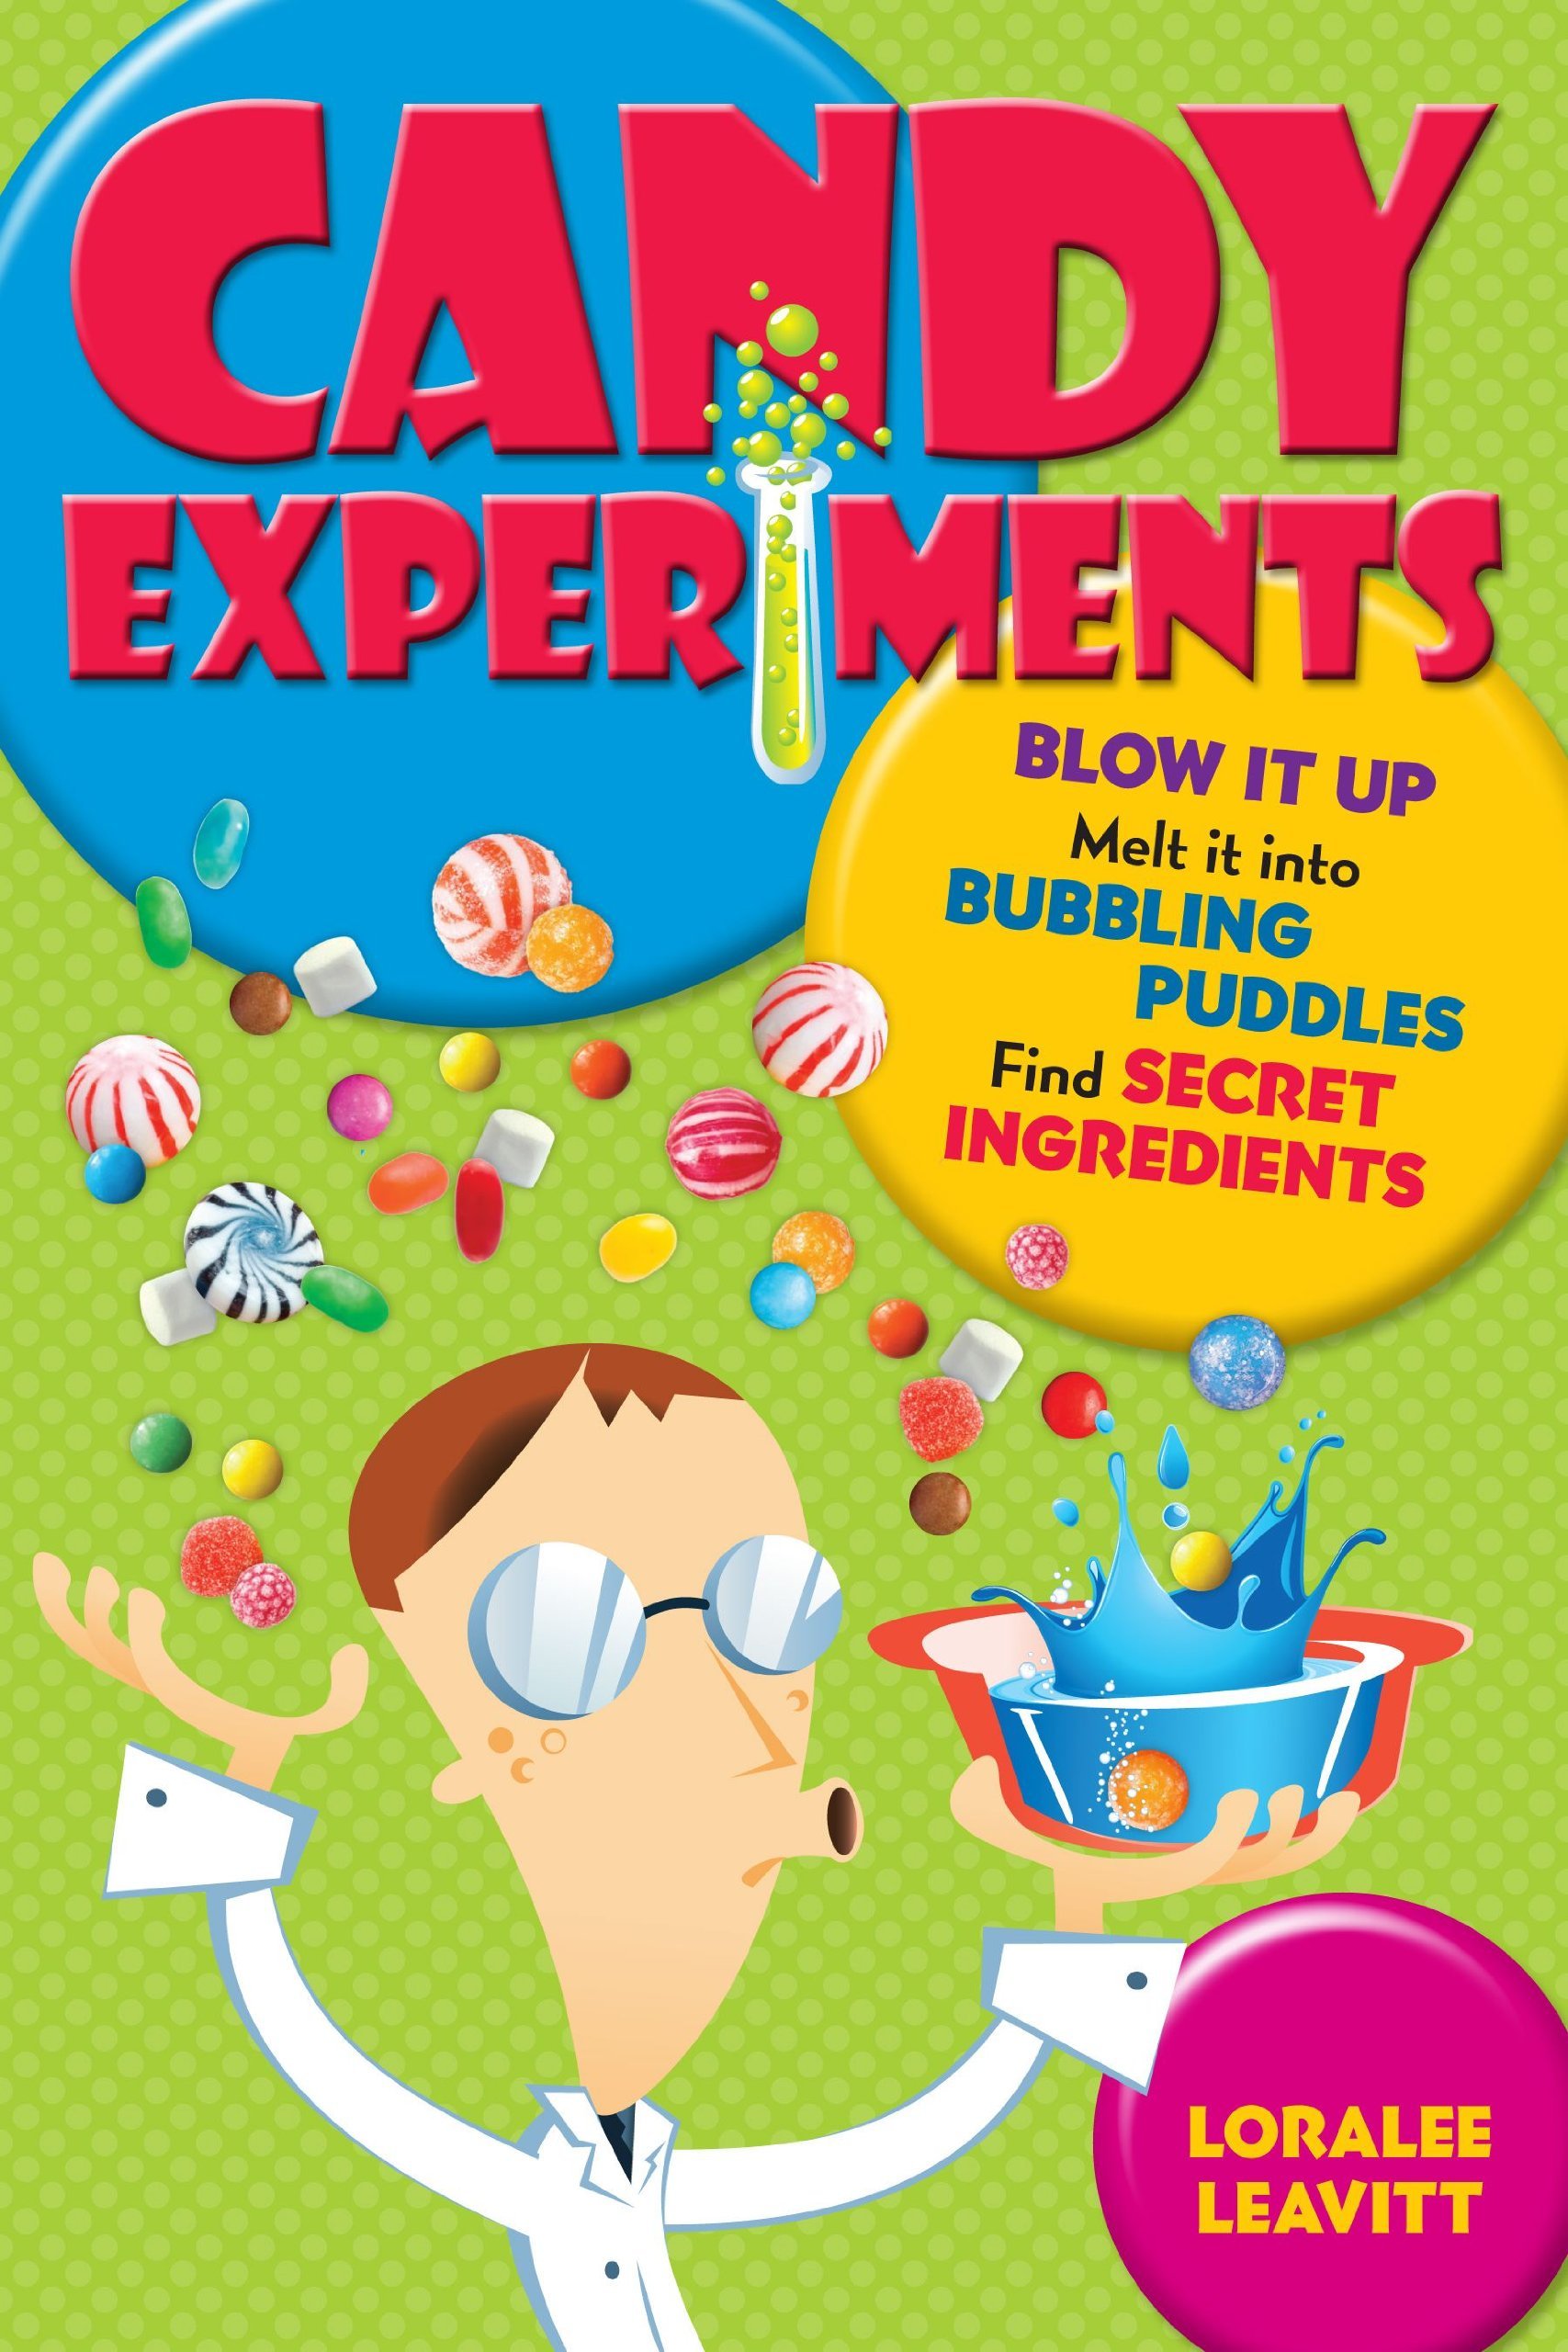 70 fun and suprising candy experiments will have kids happily pouring their candy down the drain and learning some basic science along the way.